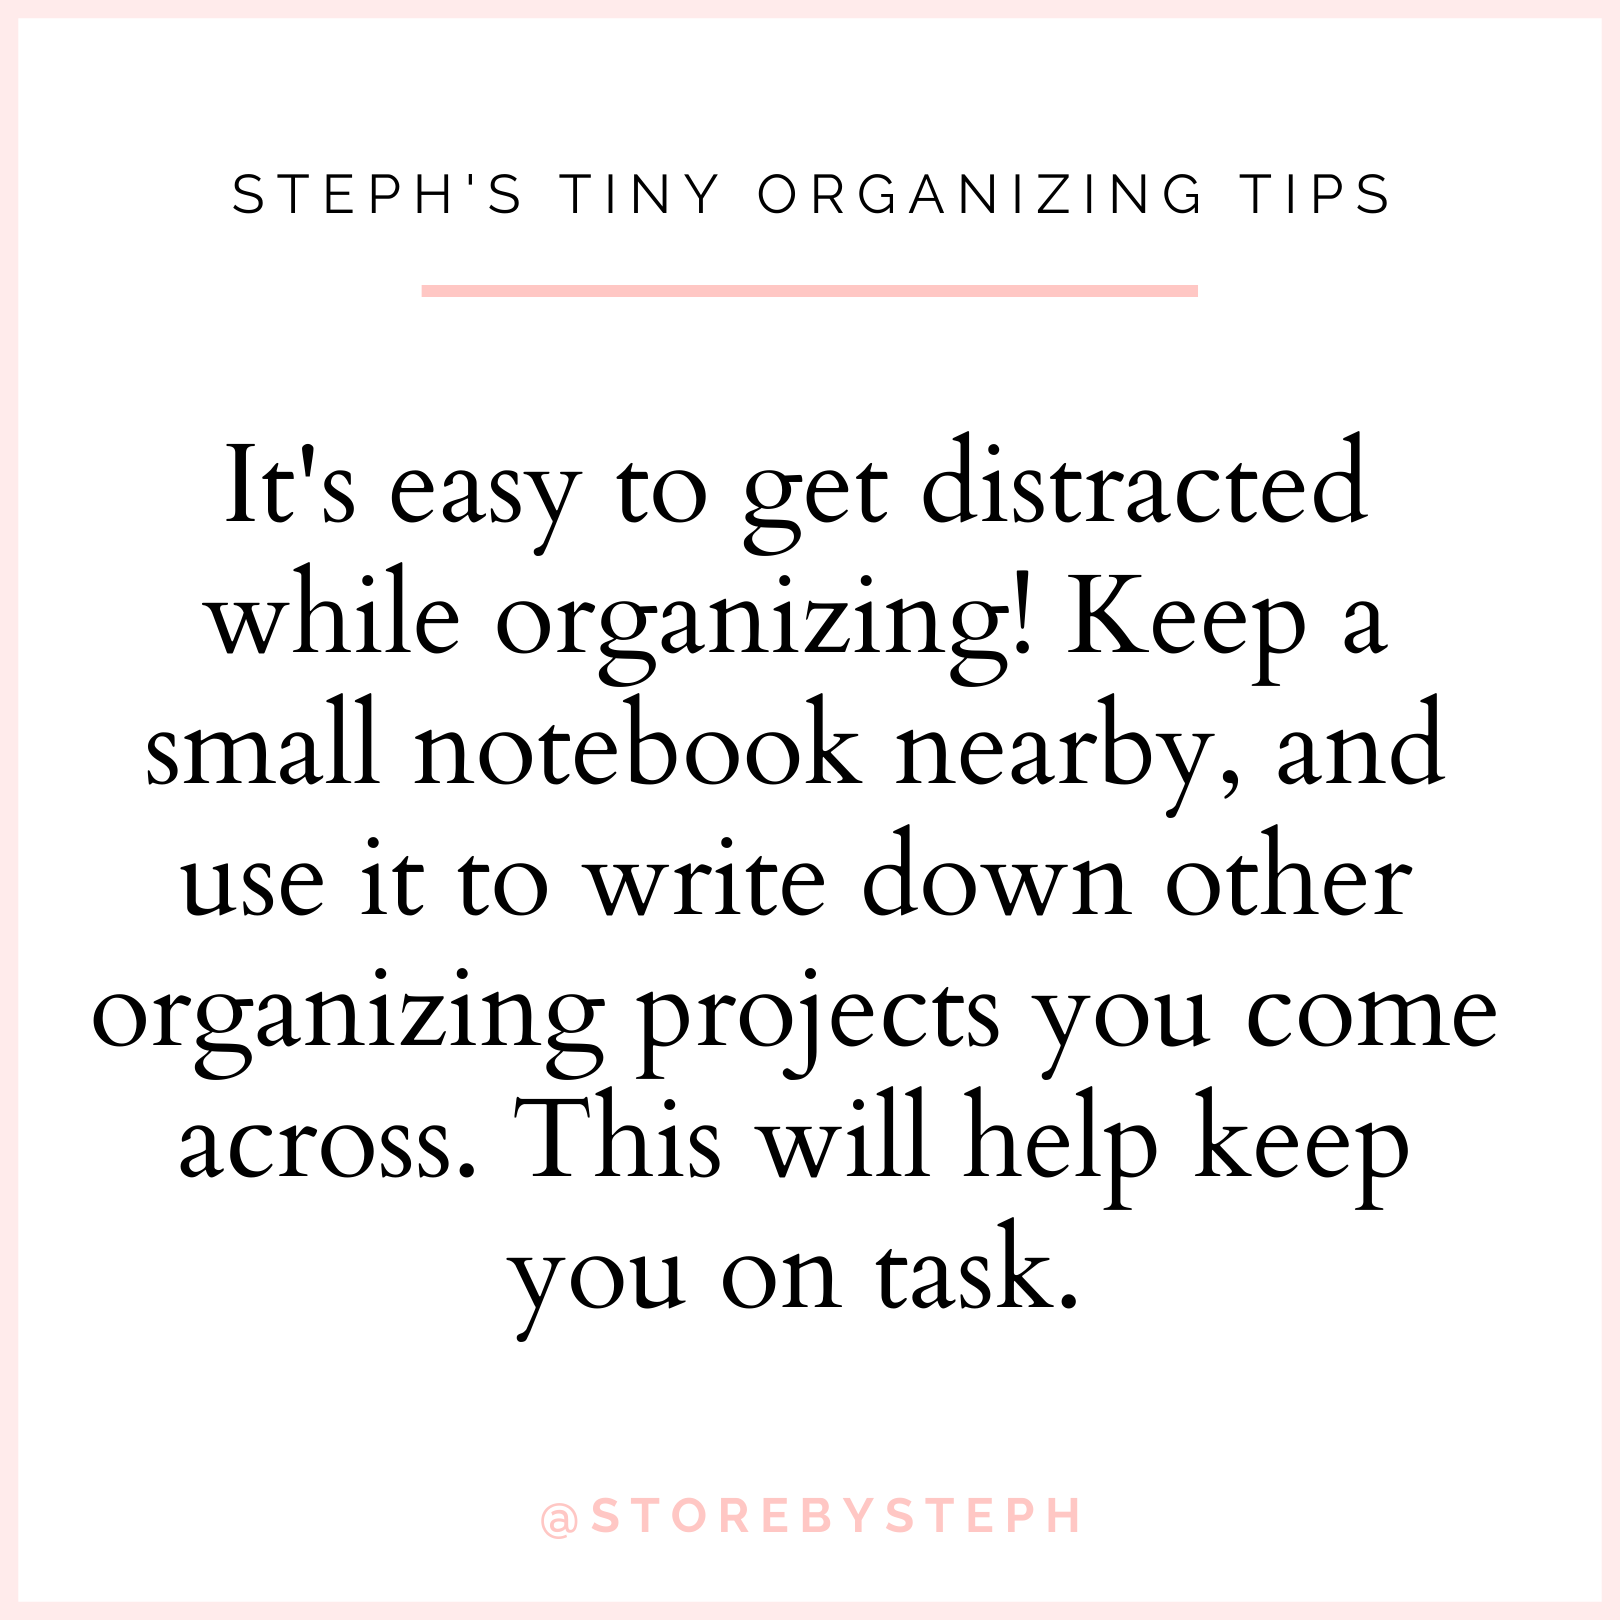 helpful tips about organizing from a professional organizer instagram account